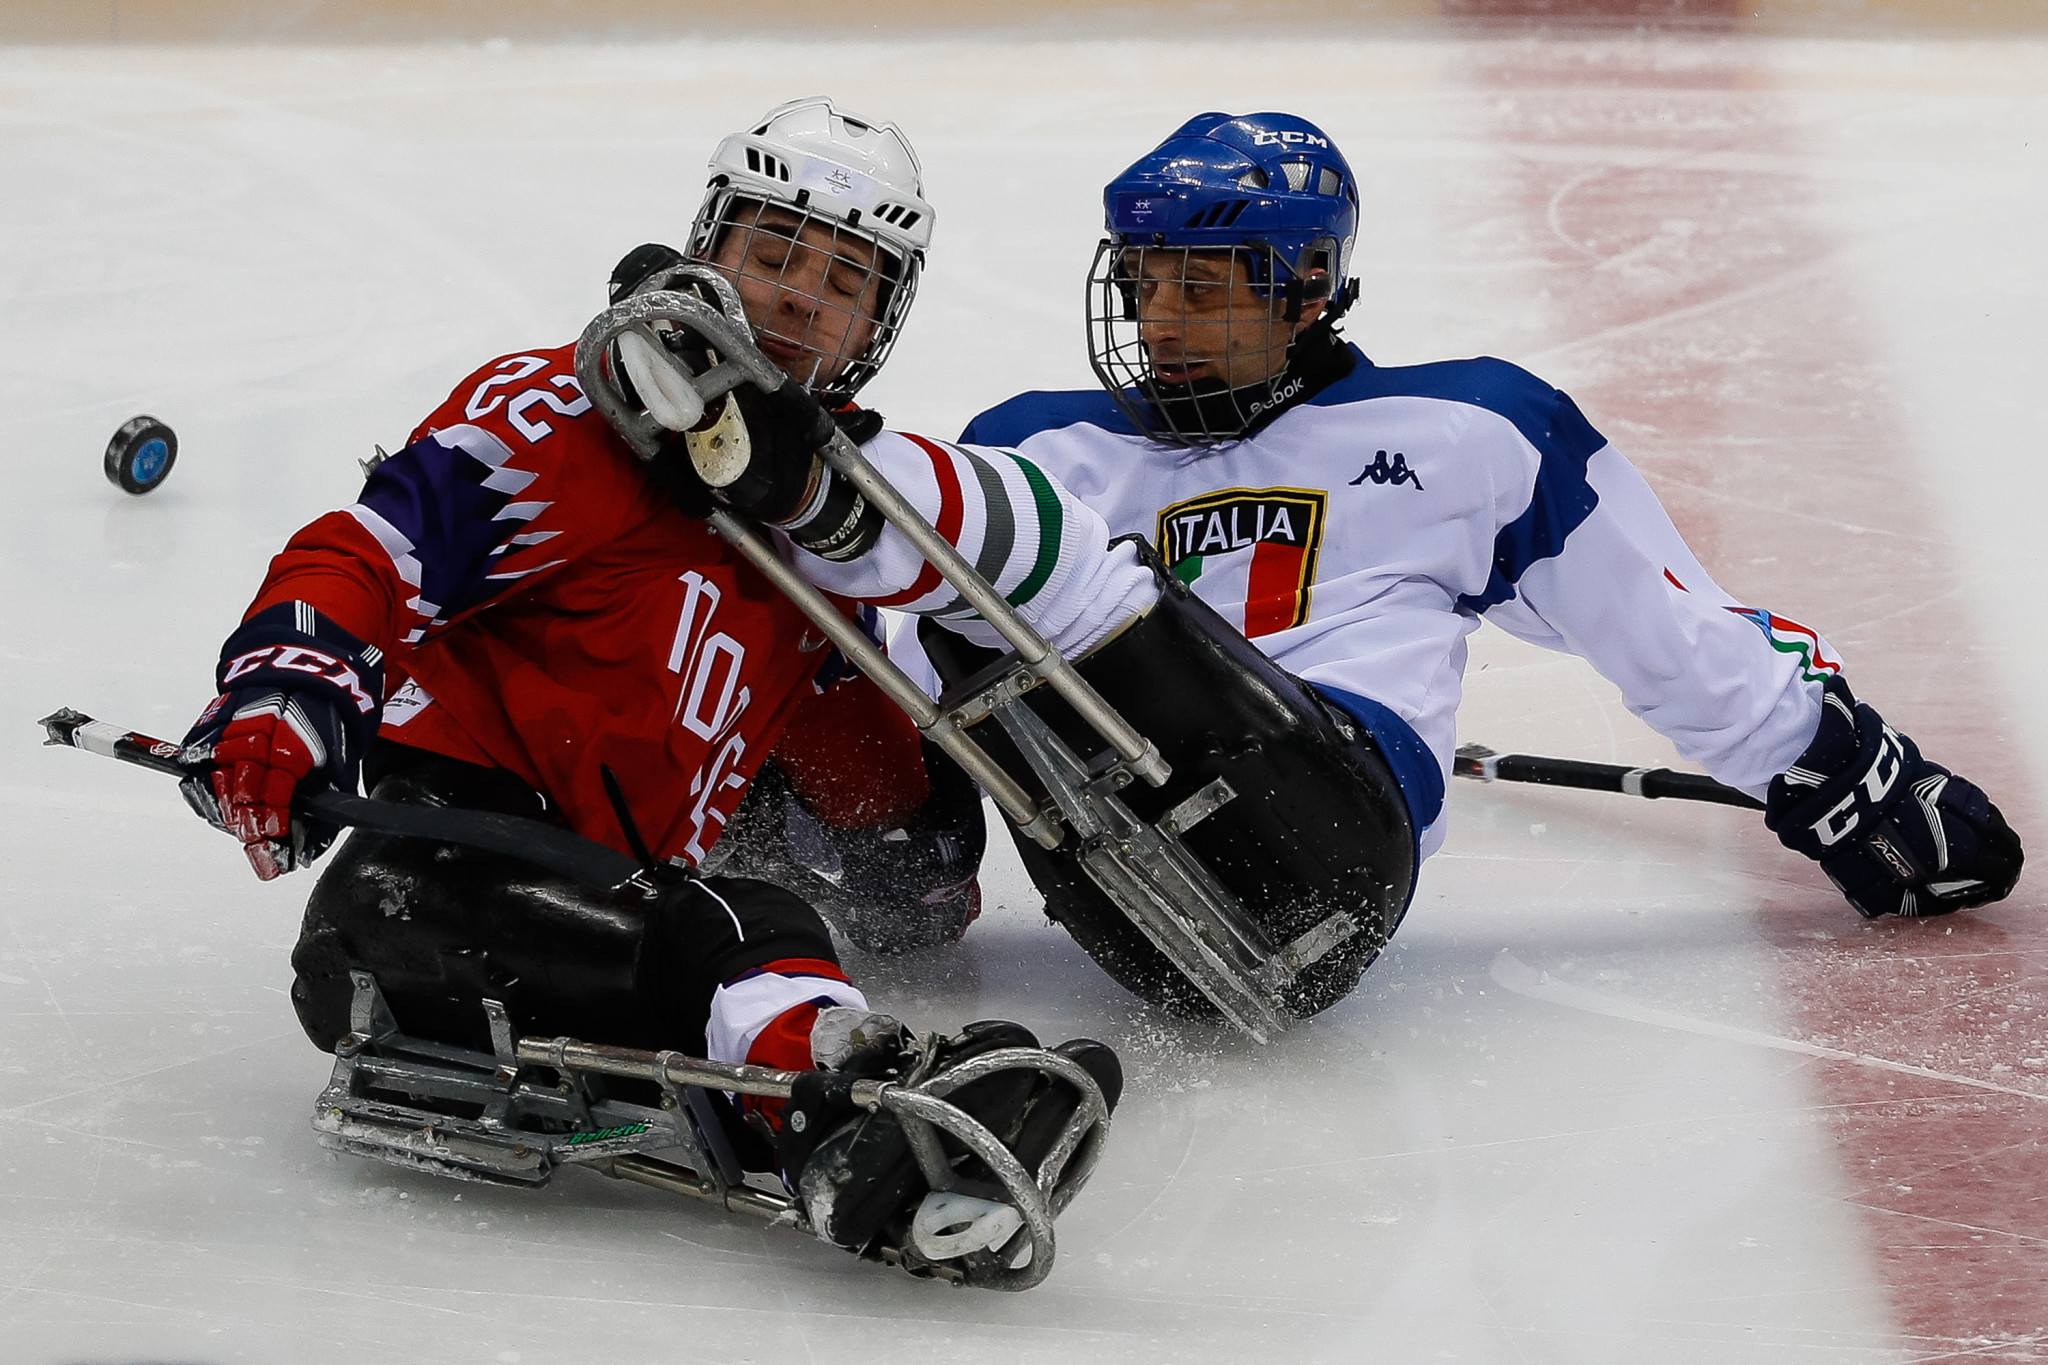 A Norwegian and Italian player collide in the first Para-ice hockey match of Pyeongchang 2018 ©Getty Images